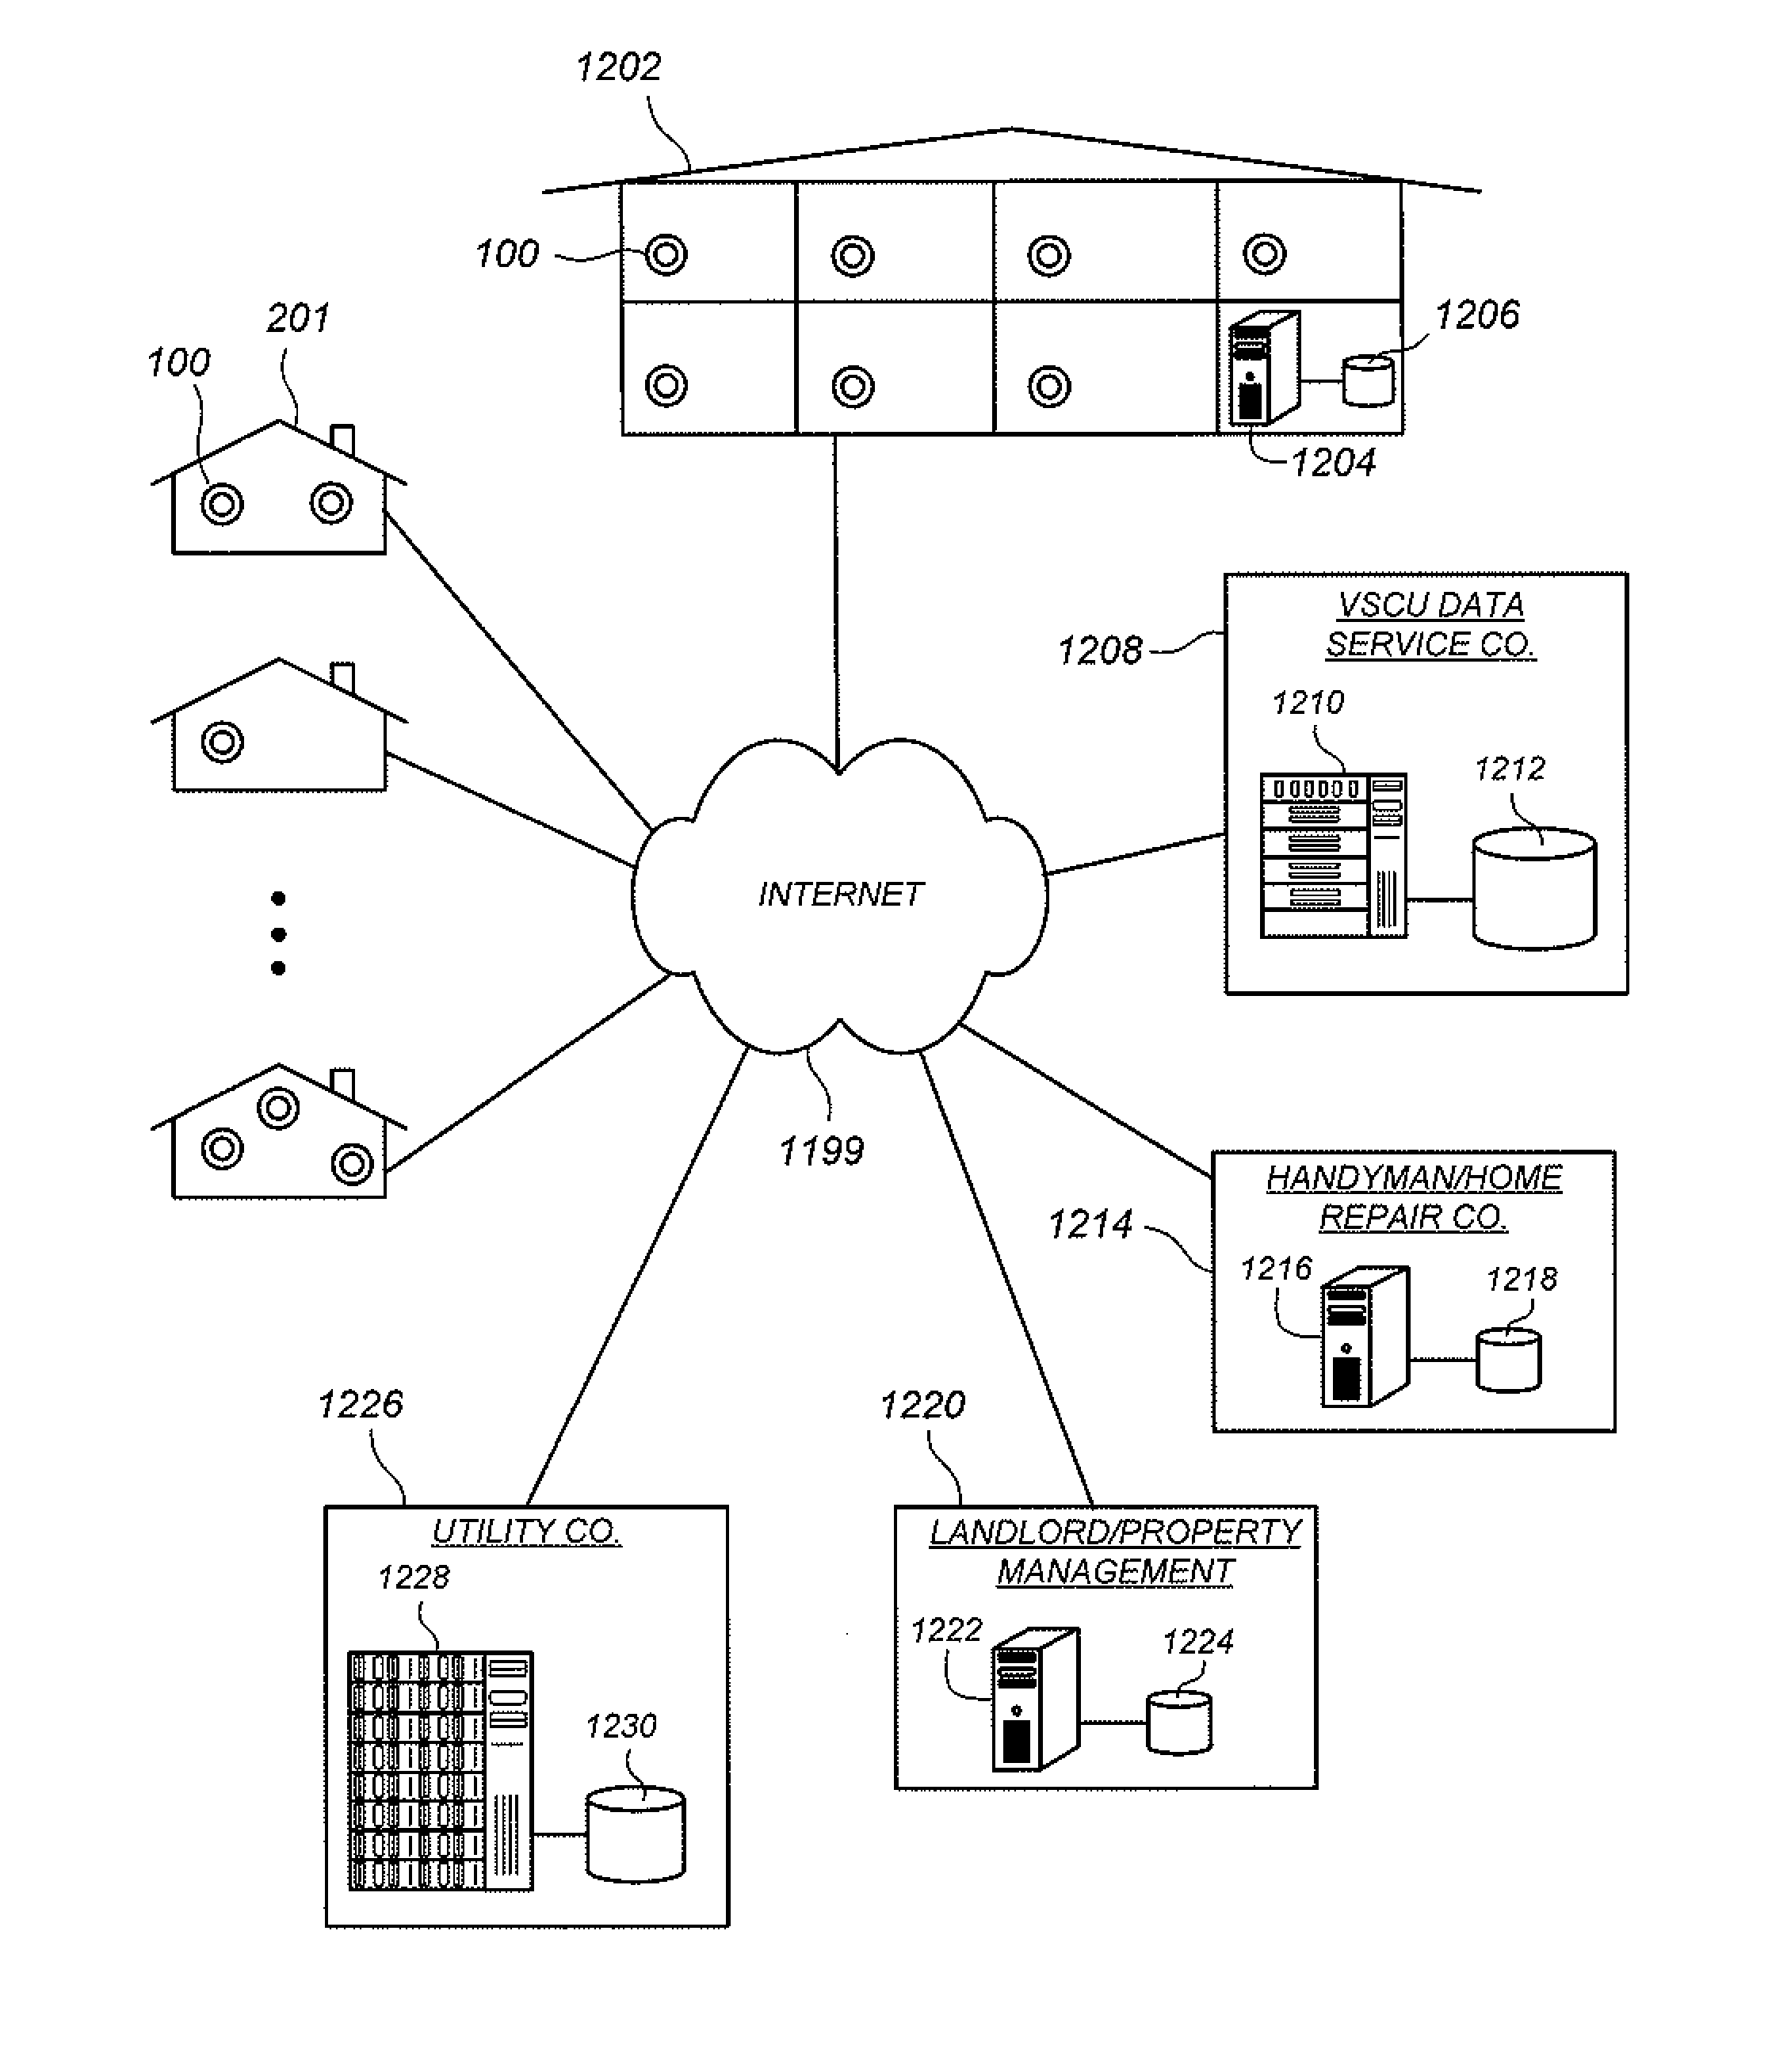 Distribution of call-home events over time to ameliorate high communications and computation peaks in intelligent control system